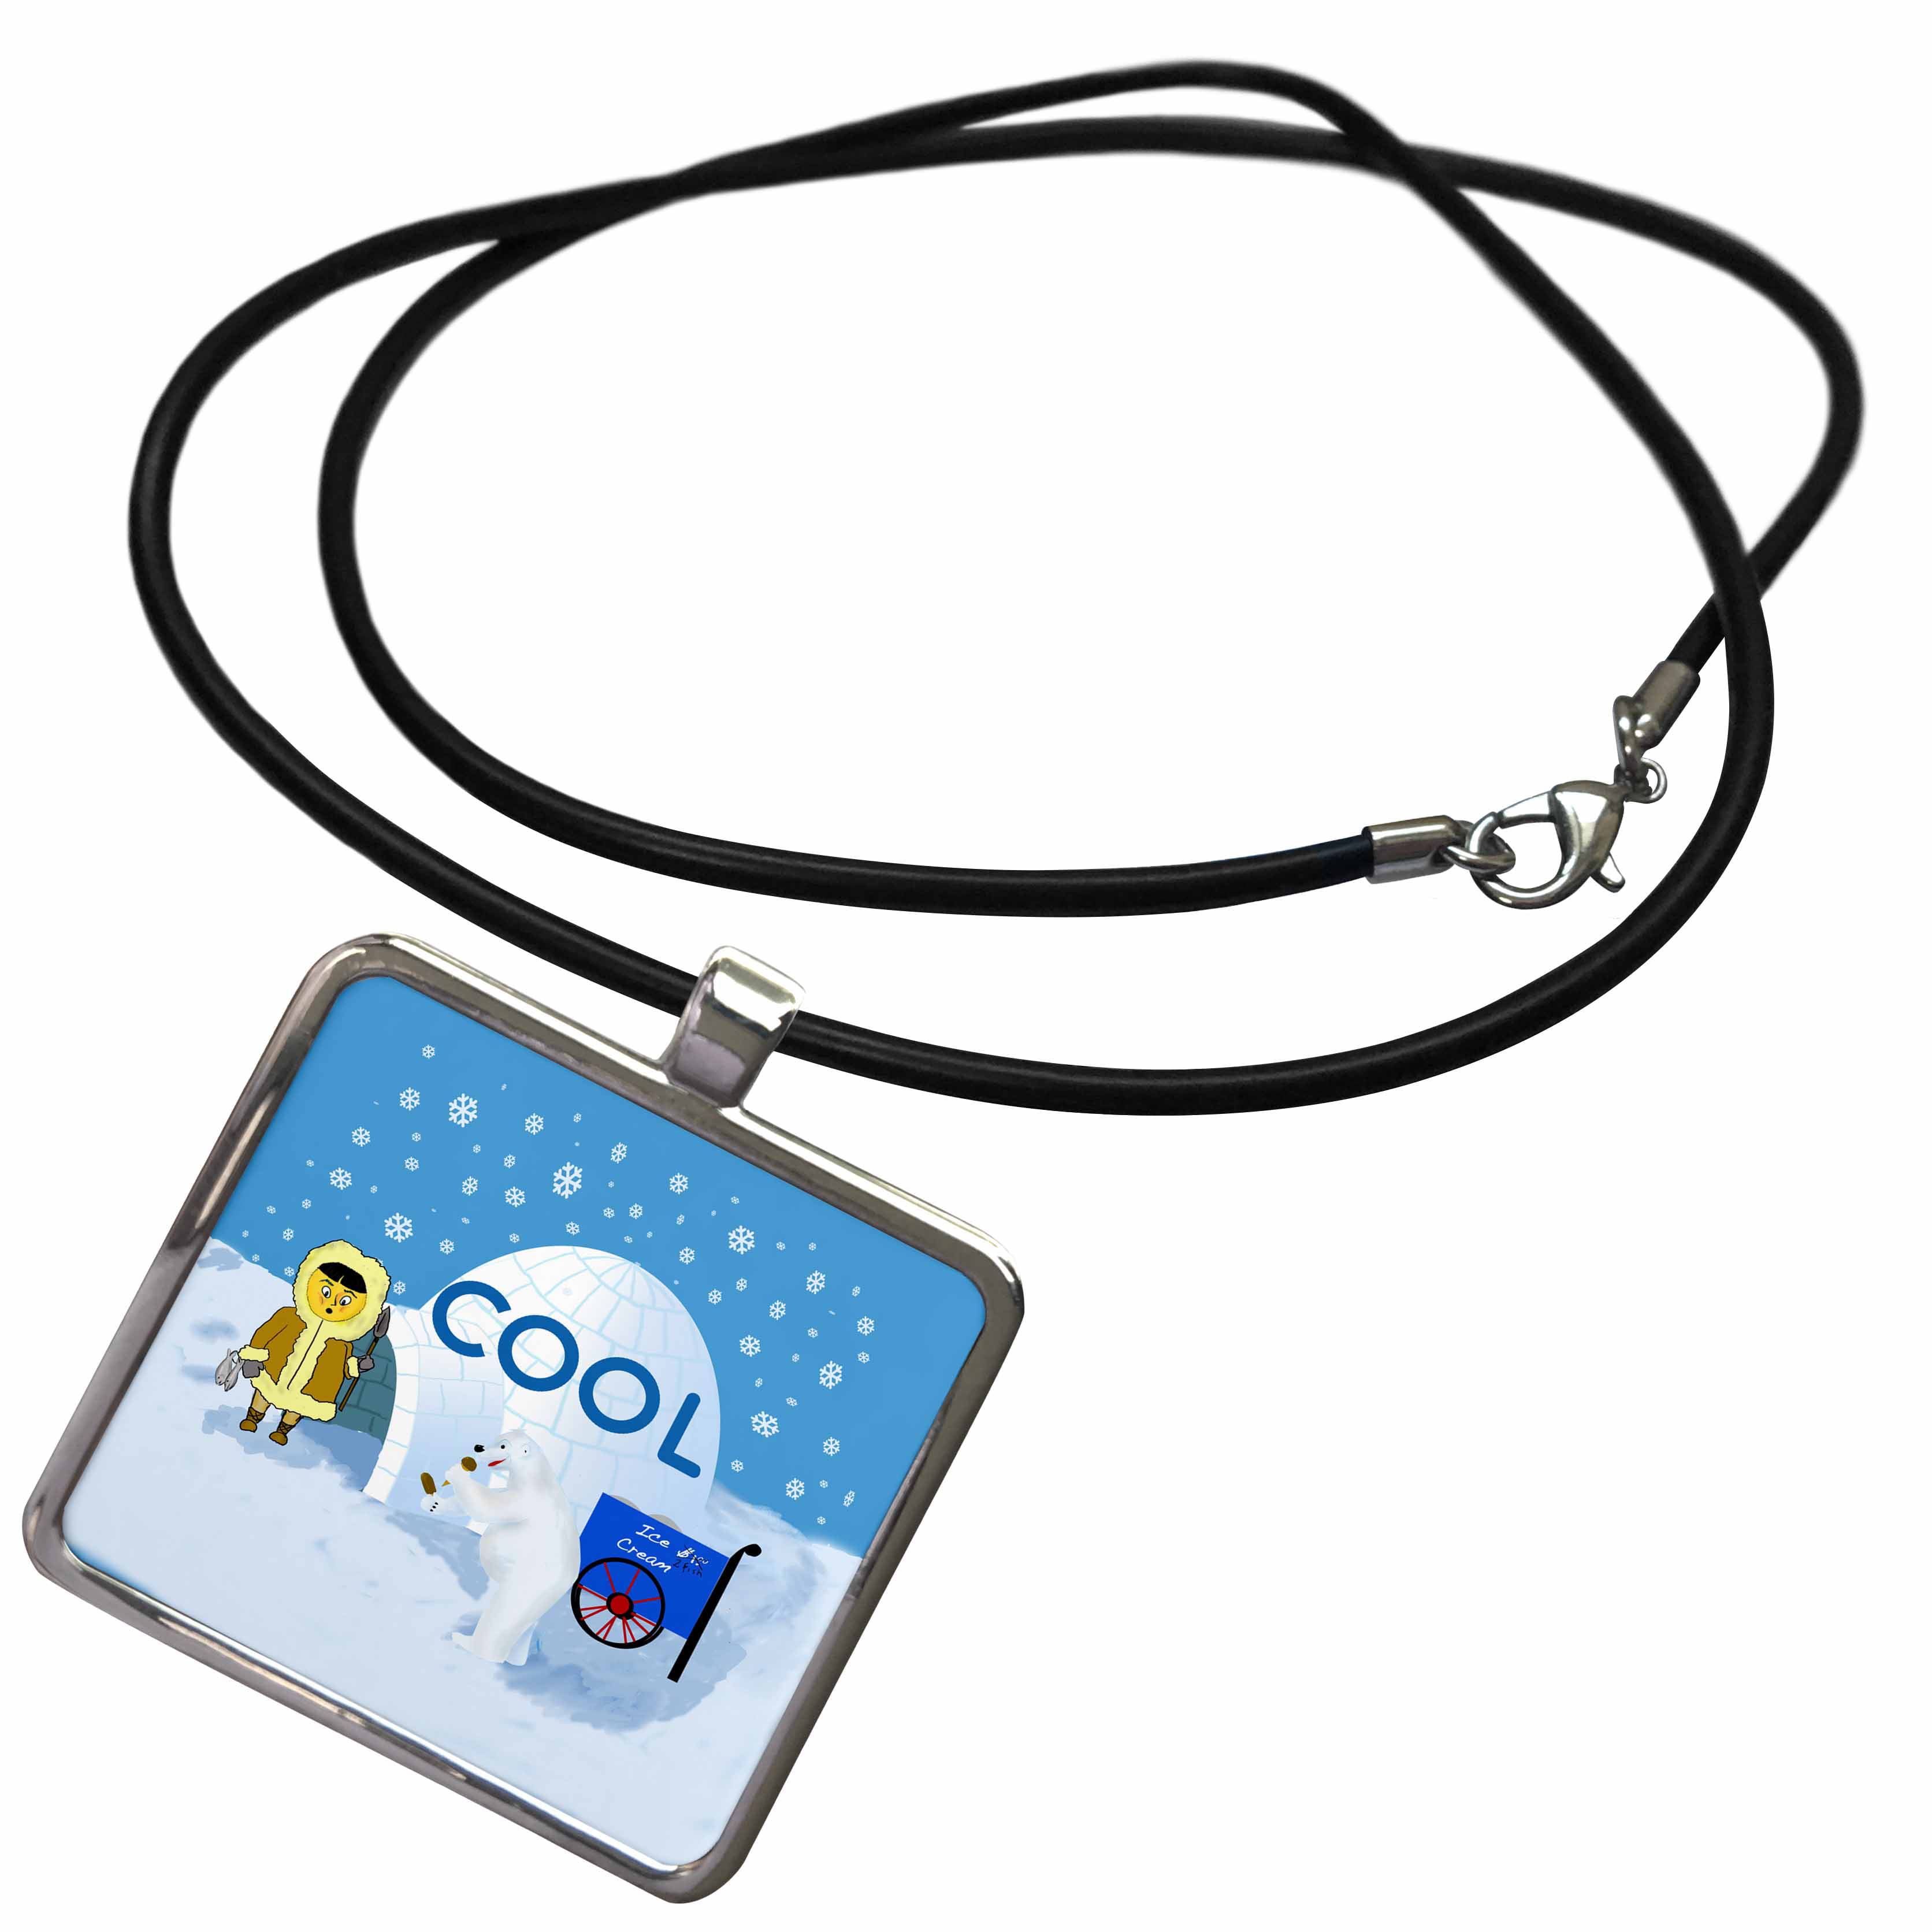 3dRose Cool cartoon. Igloo and polar bear selling ice cream confront  Eskimo. - Necklace with Pendant (ncl_262908_1) 